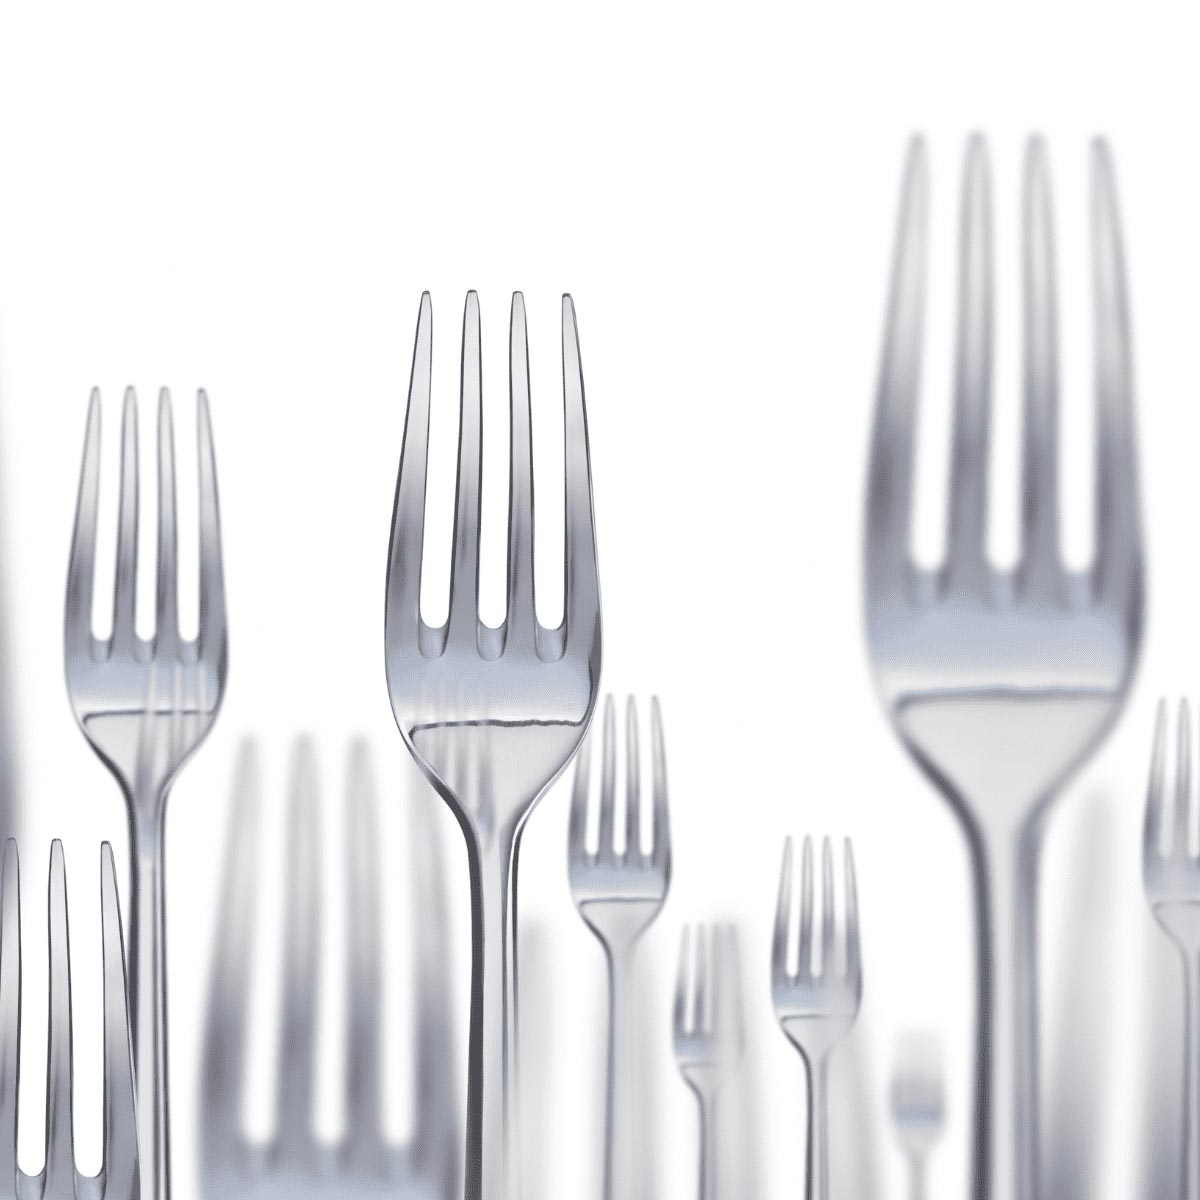 Which Fork Is Bigger Than A Salad Fork?